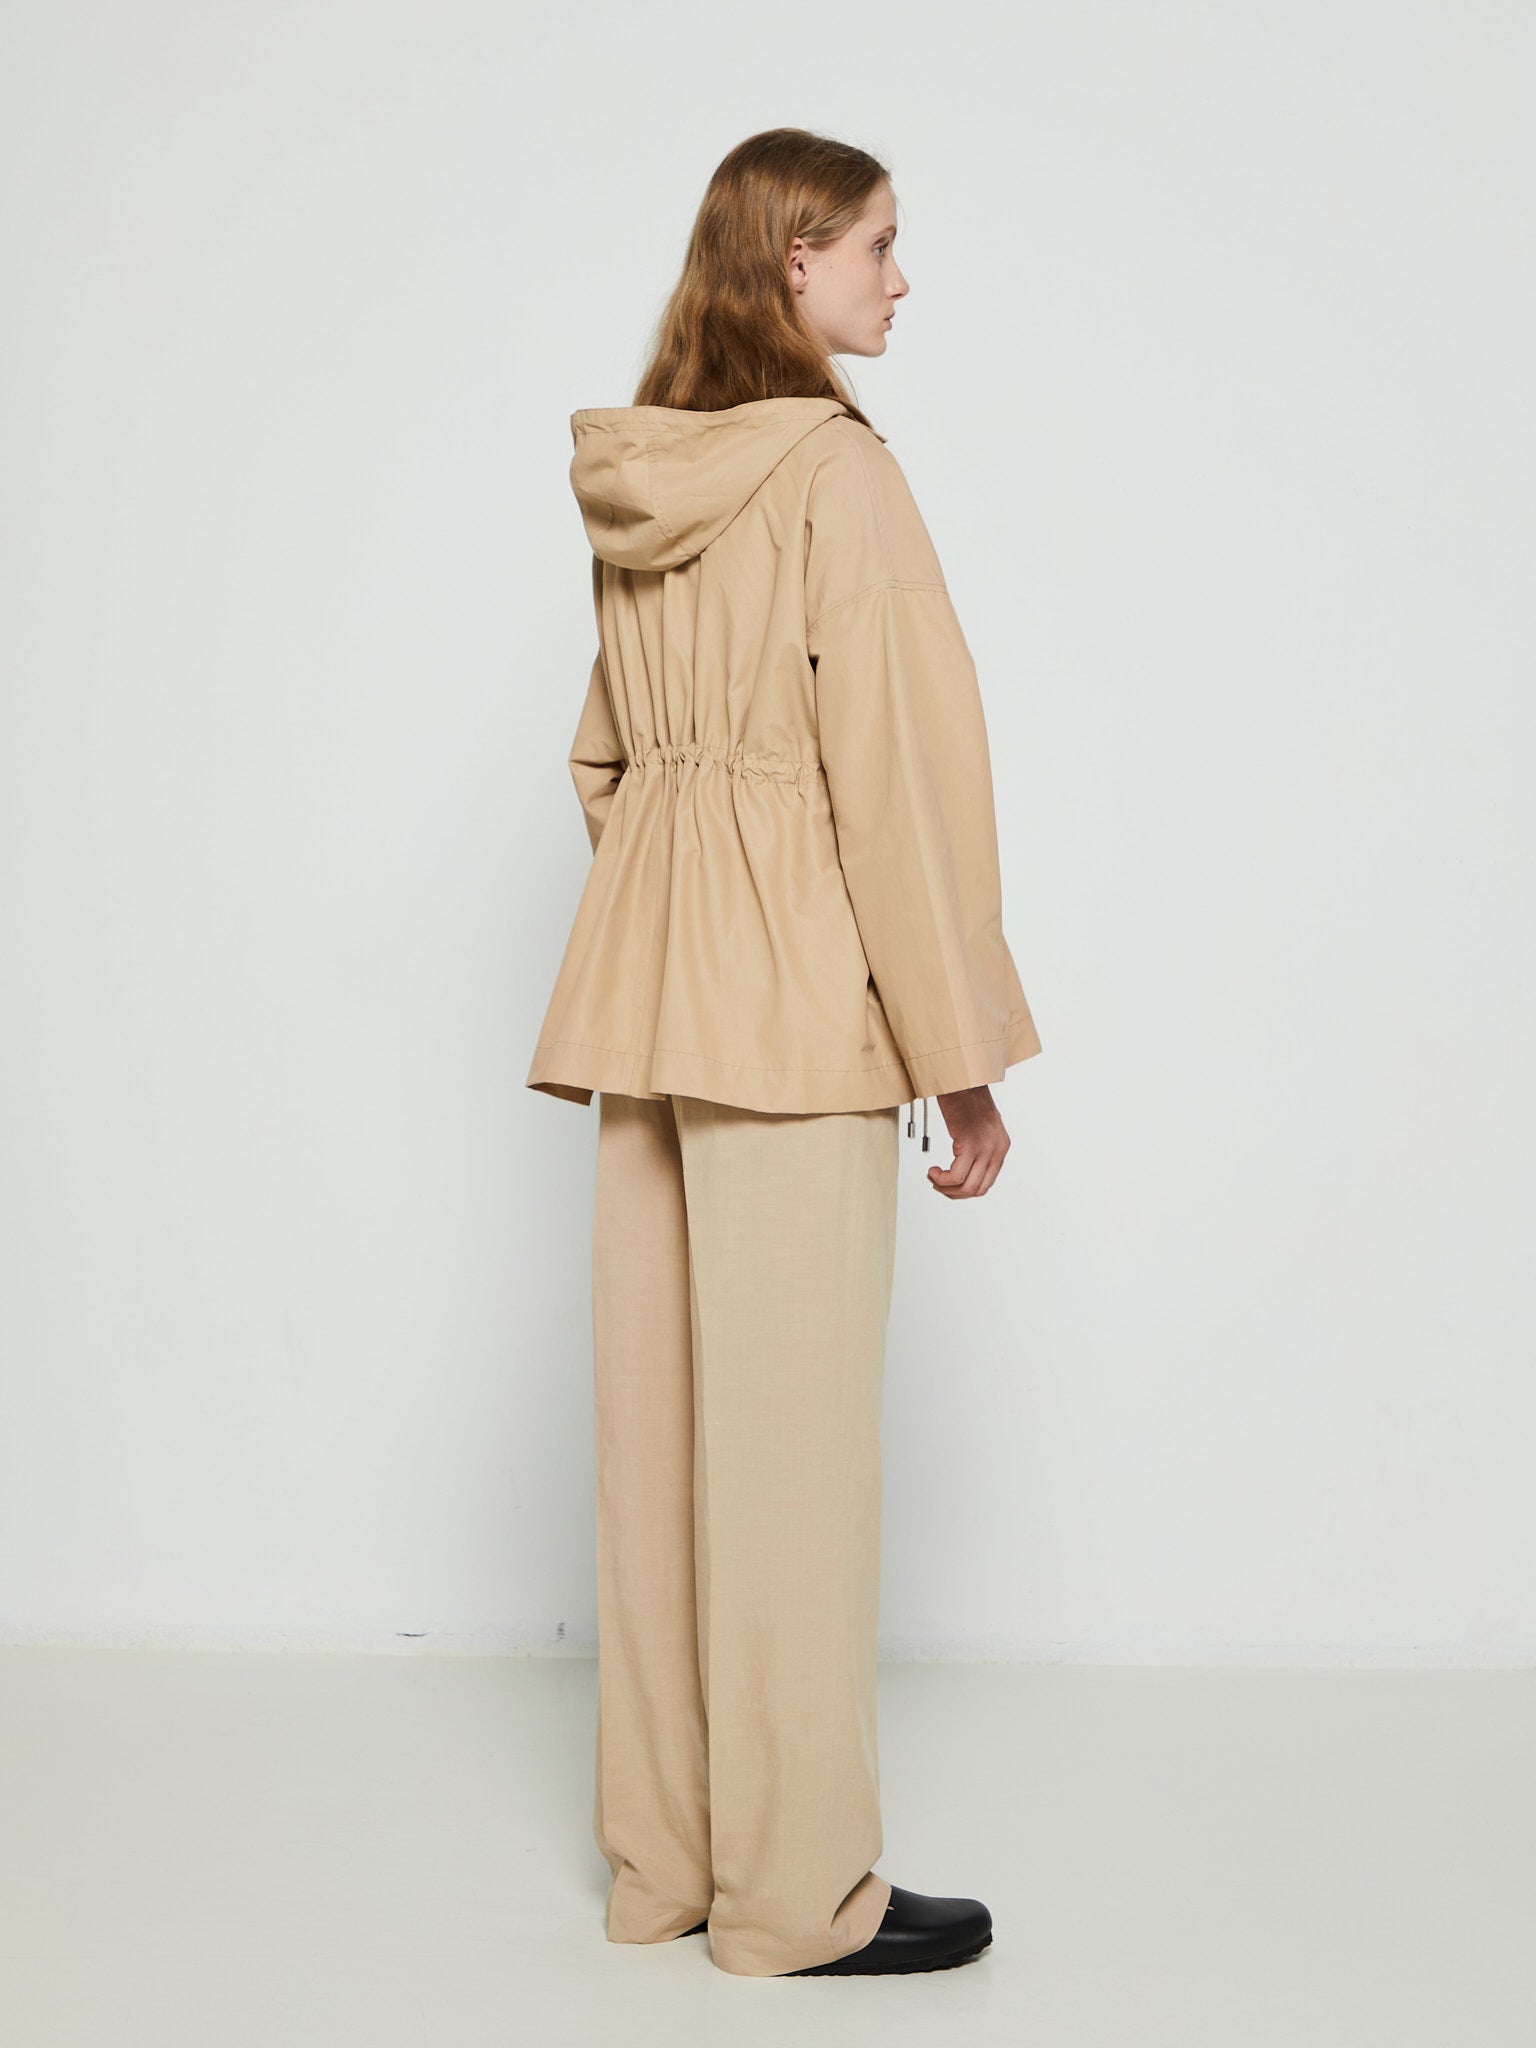 Hooded Cotton-Nylon Parka Jacket in Trench Beige